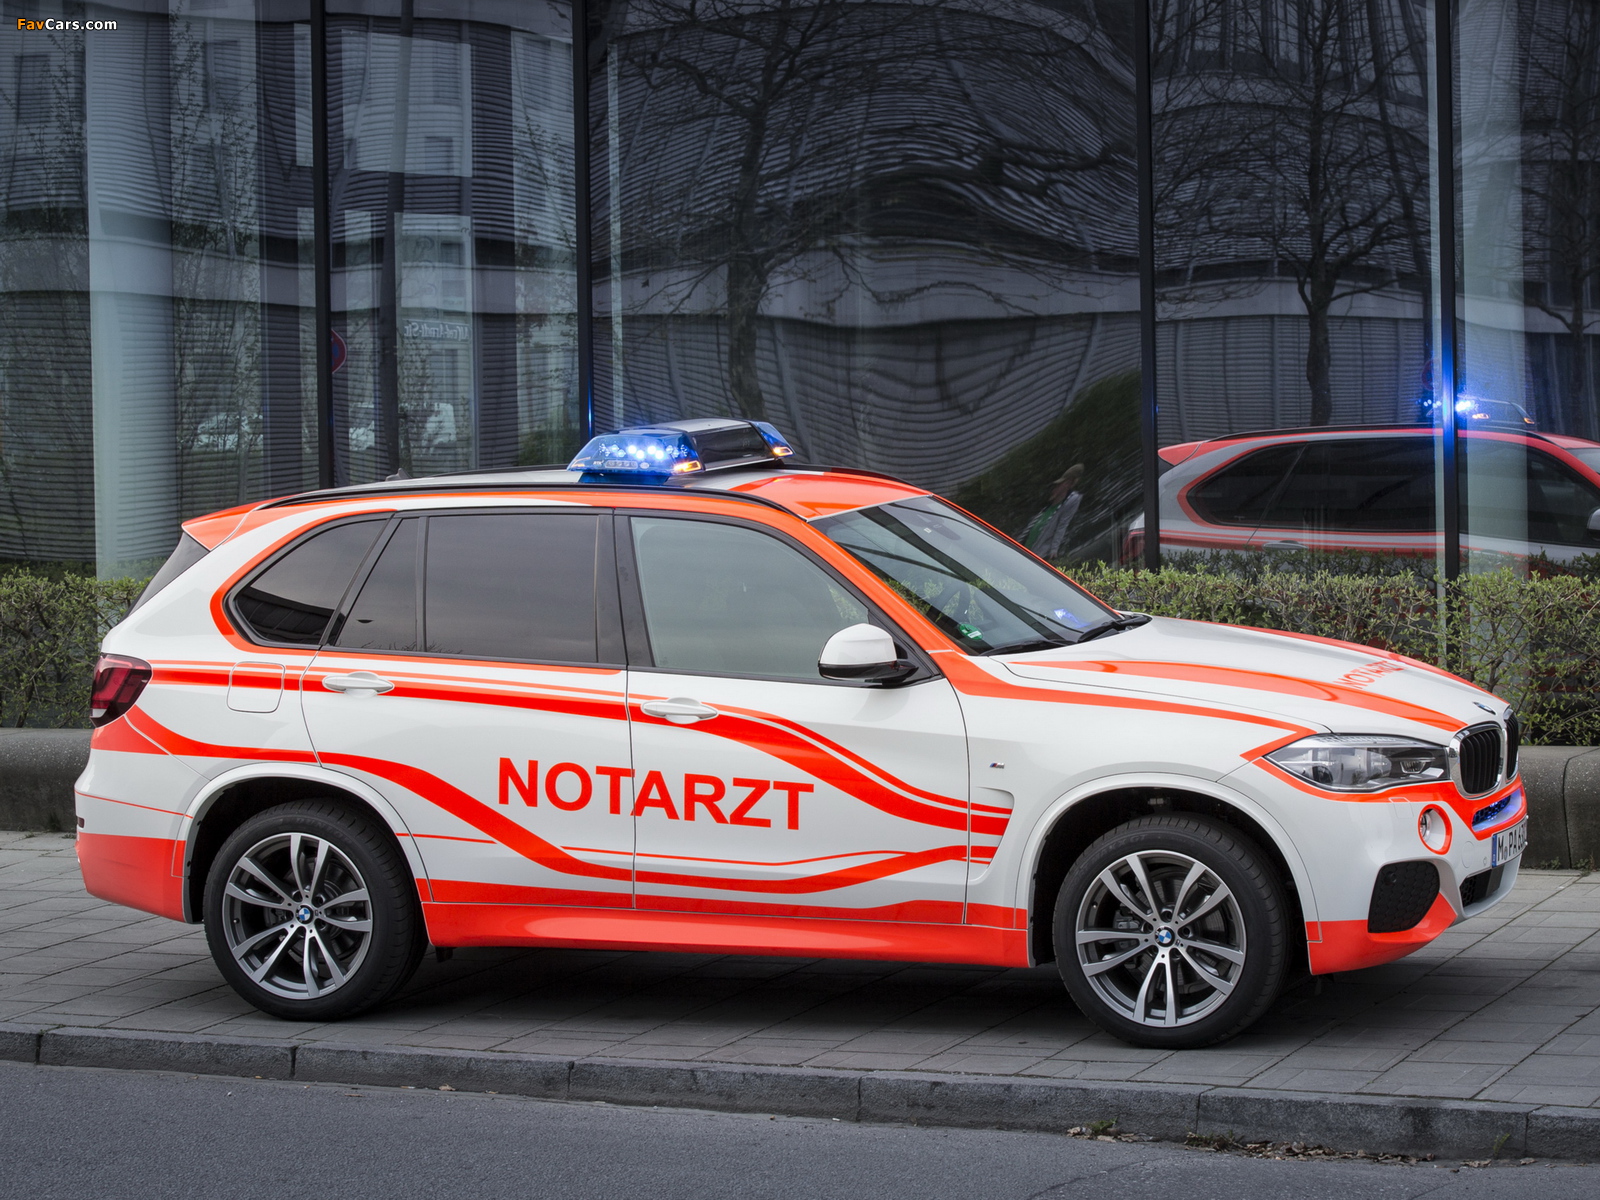 BMW X5 xDrive30d Notarzt (F15) 2014 pictures (1600 x 1200)